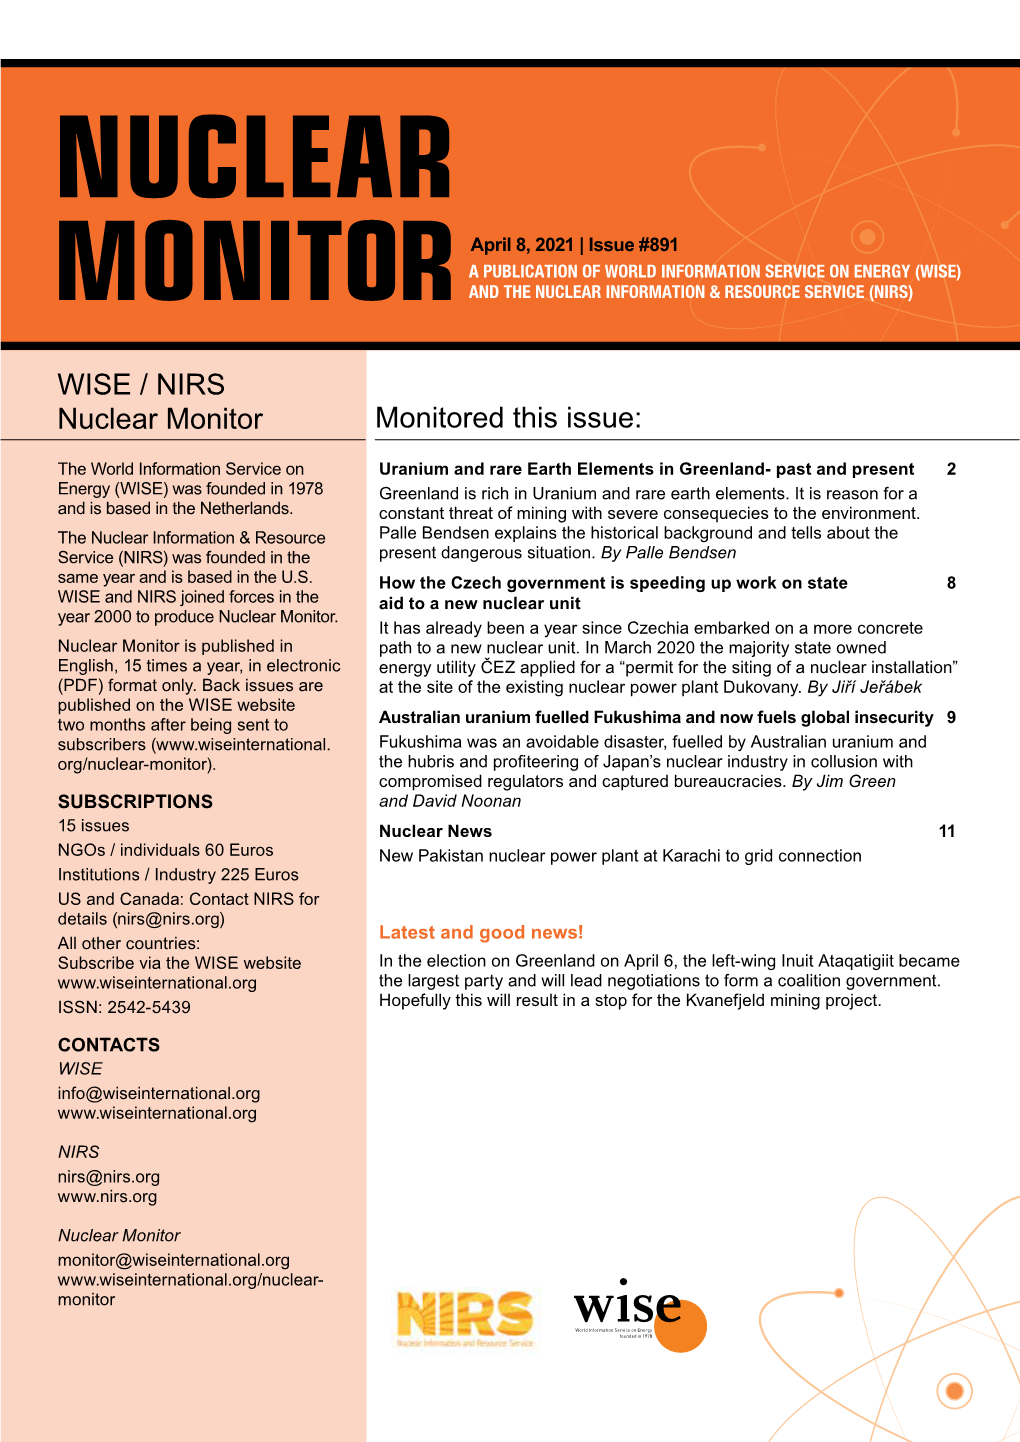 NUCLEAR April 8, 2021 | Issue #891 a PUBLICATION of WORLD INFORMATION SERVICE on ENERGY (WISE) MONITOR and the NUCLEAR INFORMATION & RESOURCE SERVICE (NIRS)